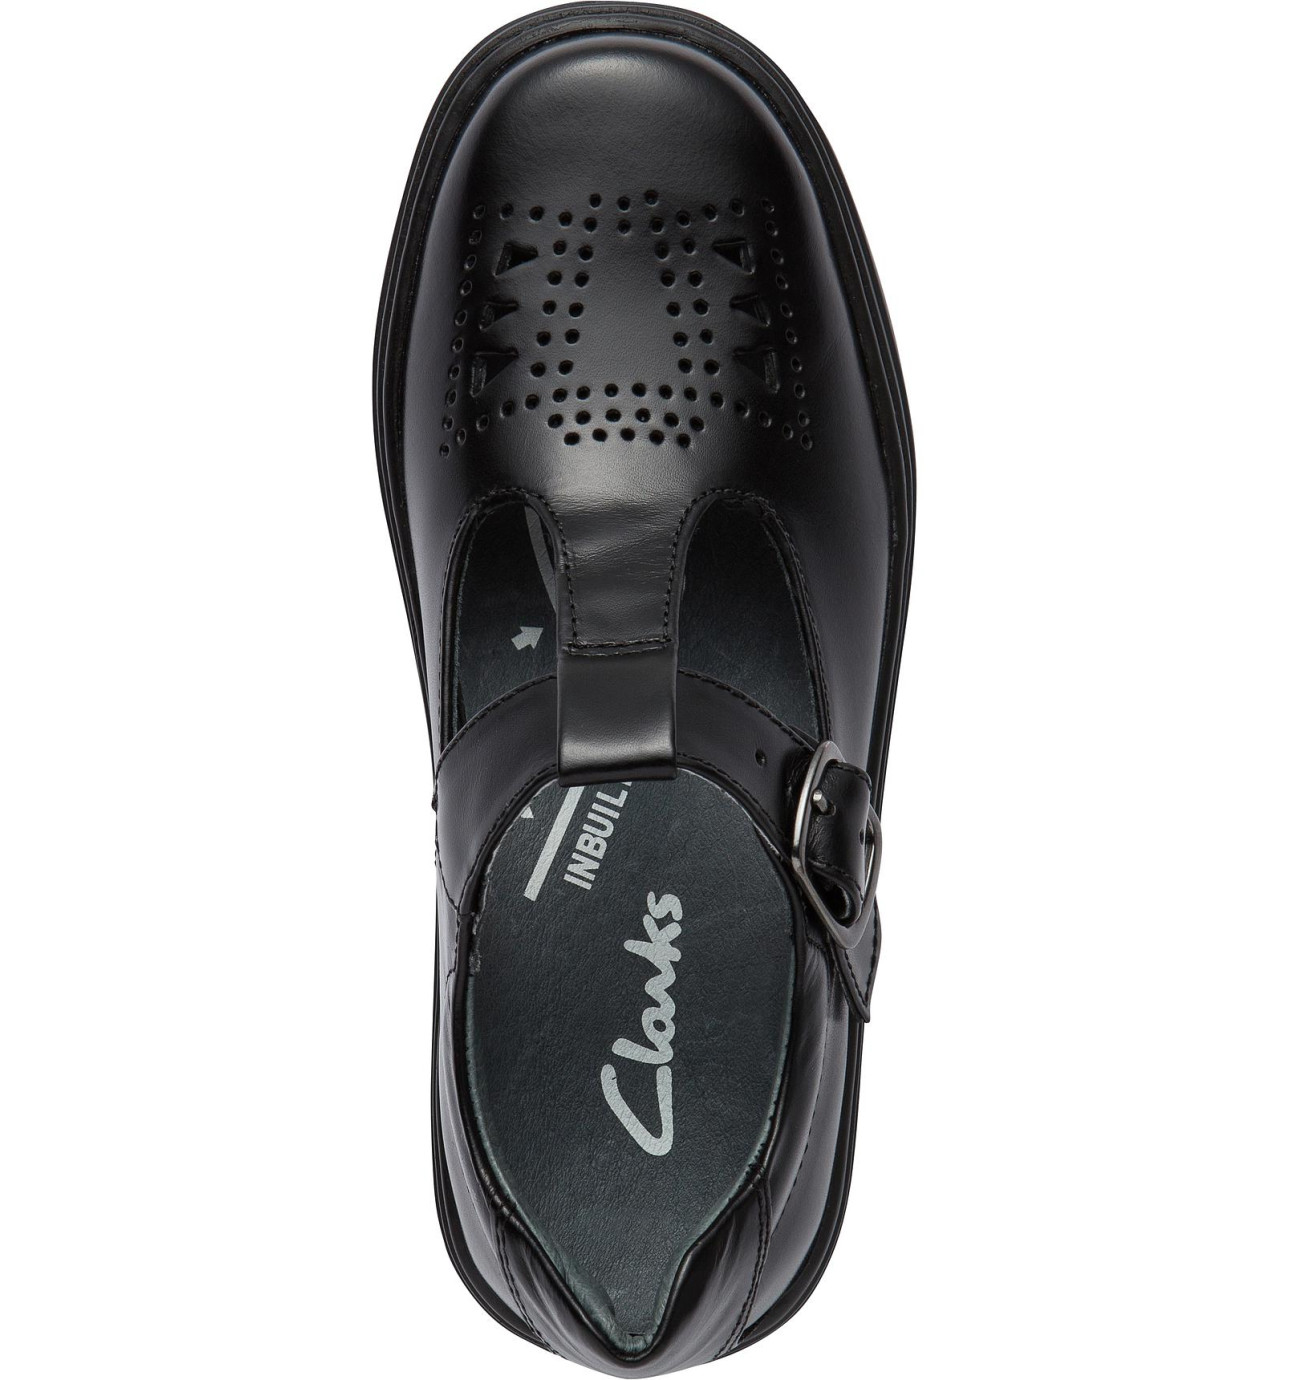 clarks shoes geelong